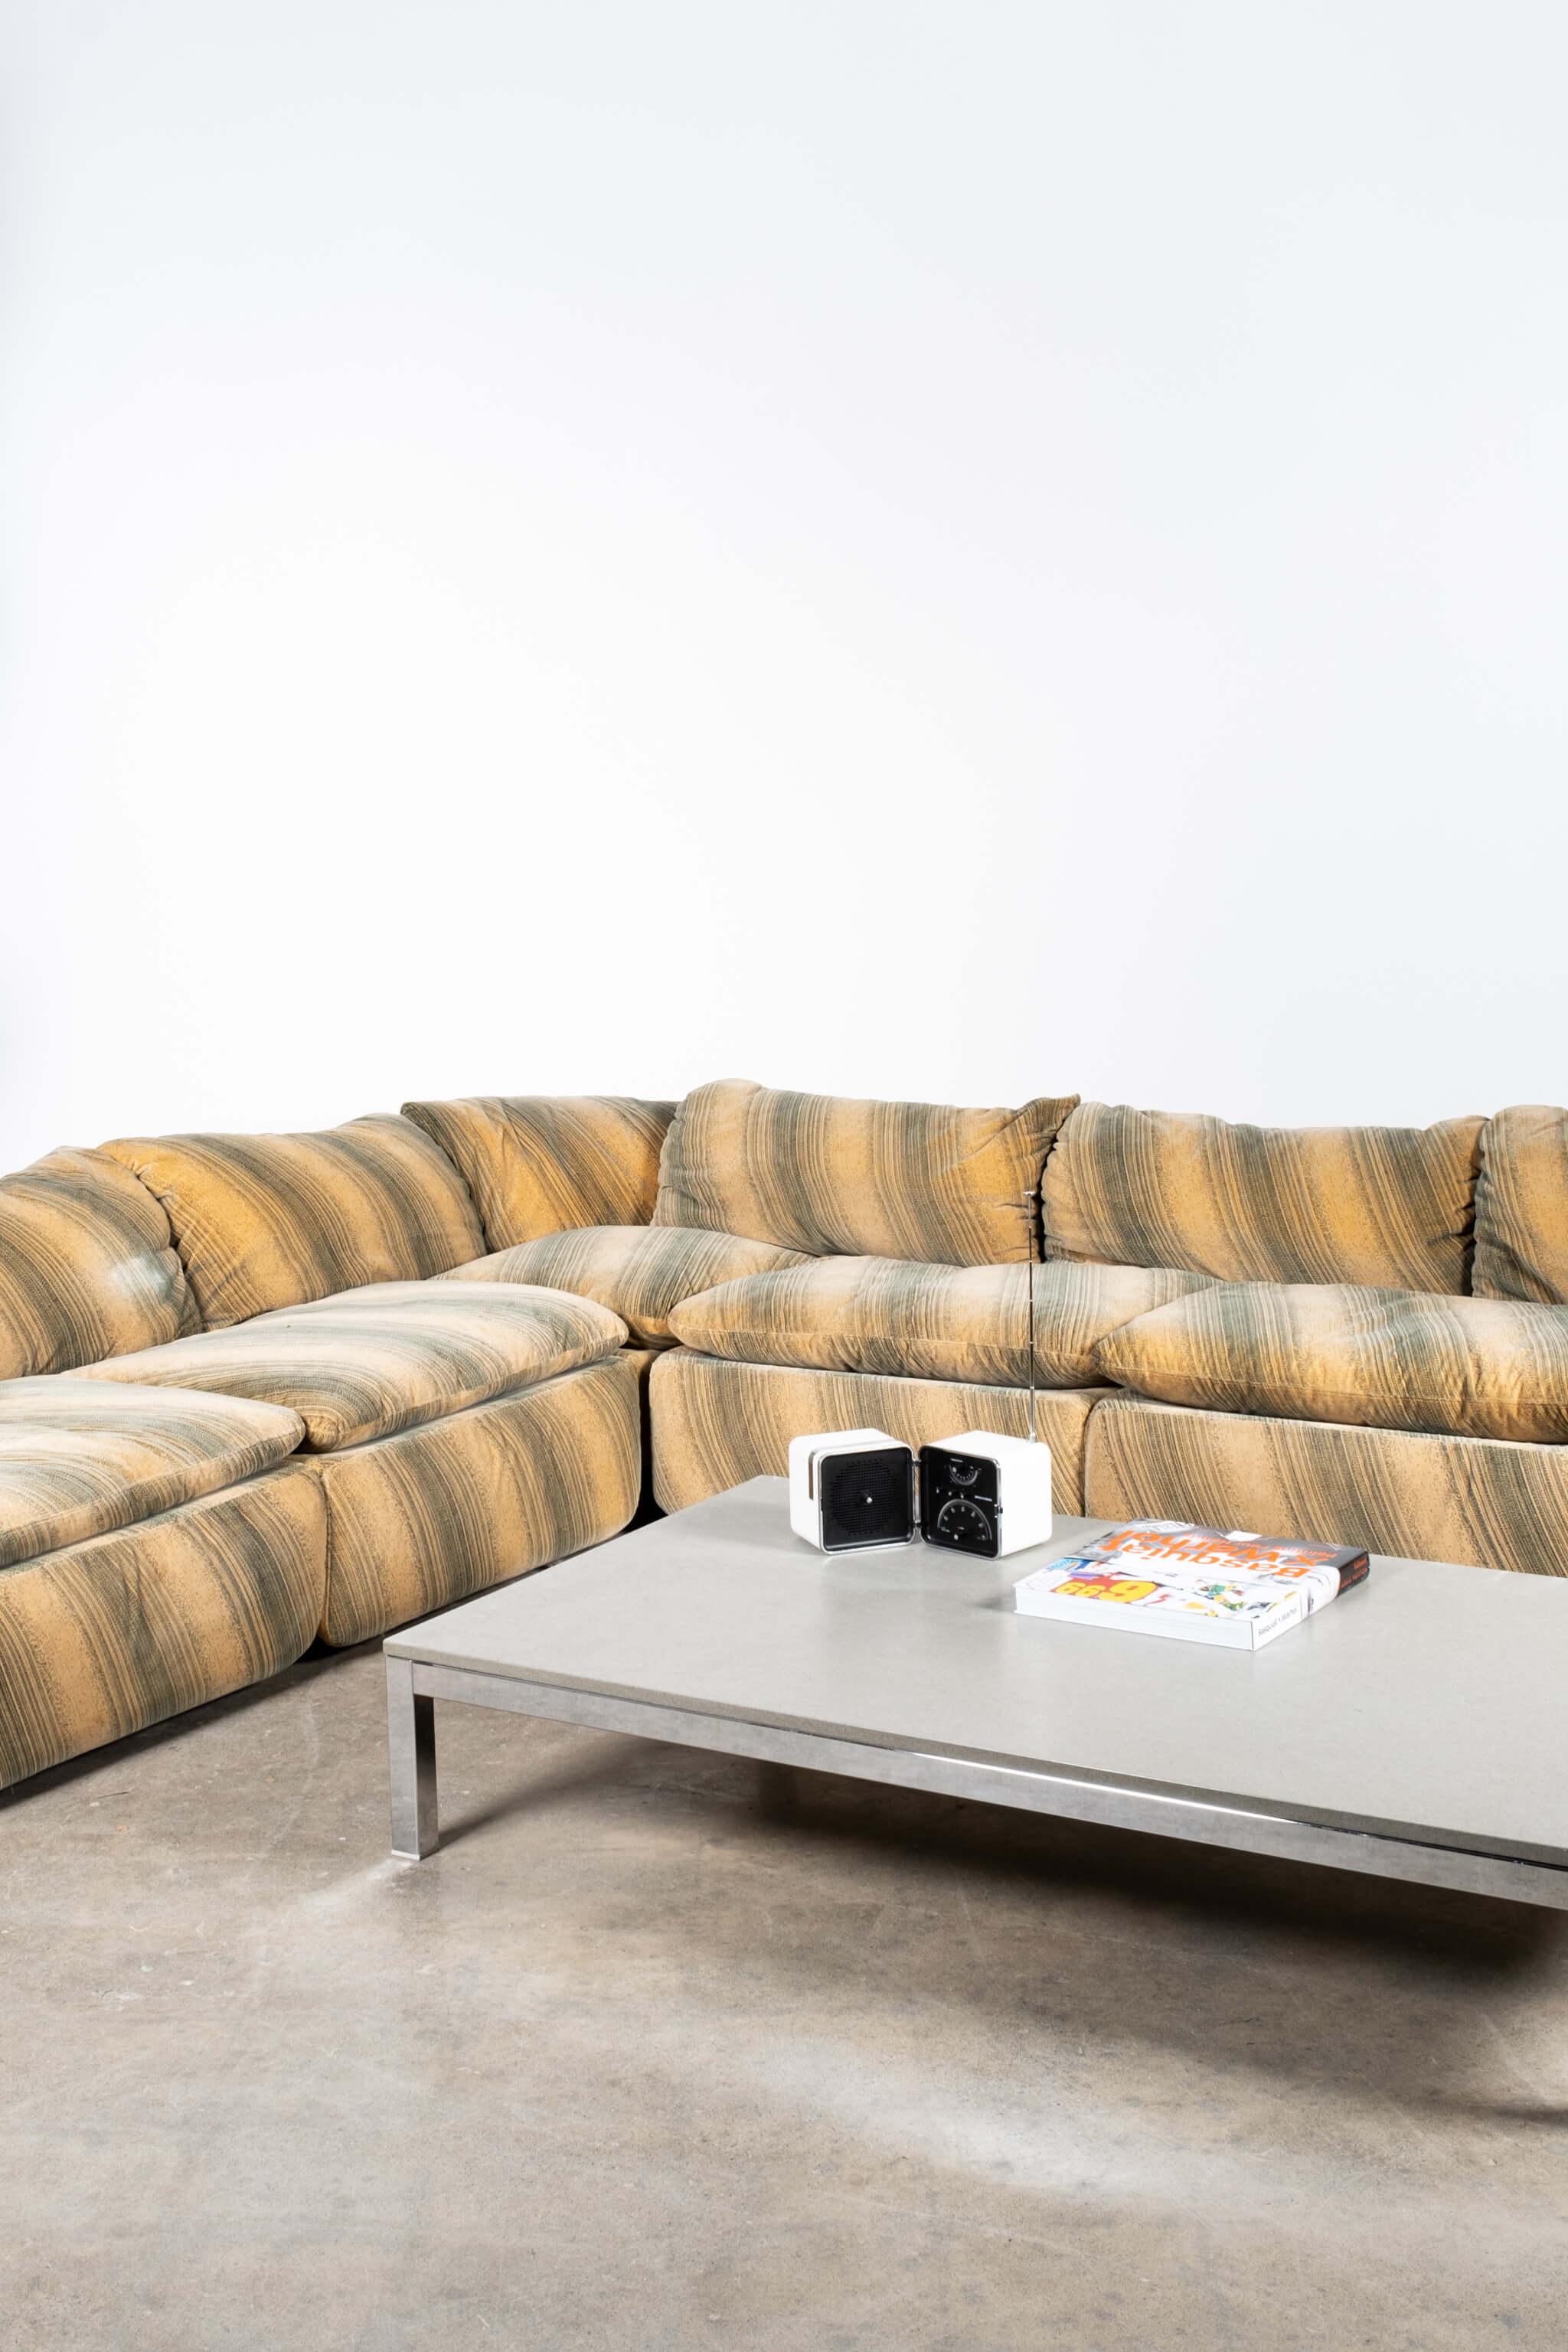 The “Confidential Sofa”, designed by Italian architect and designer Alberto Rosselli in 1972 for Saporiti Italia, is one of the first modular systems to be introduced for the home. Rosselli provided a functional connection between the backrest and